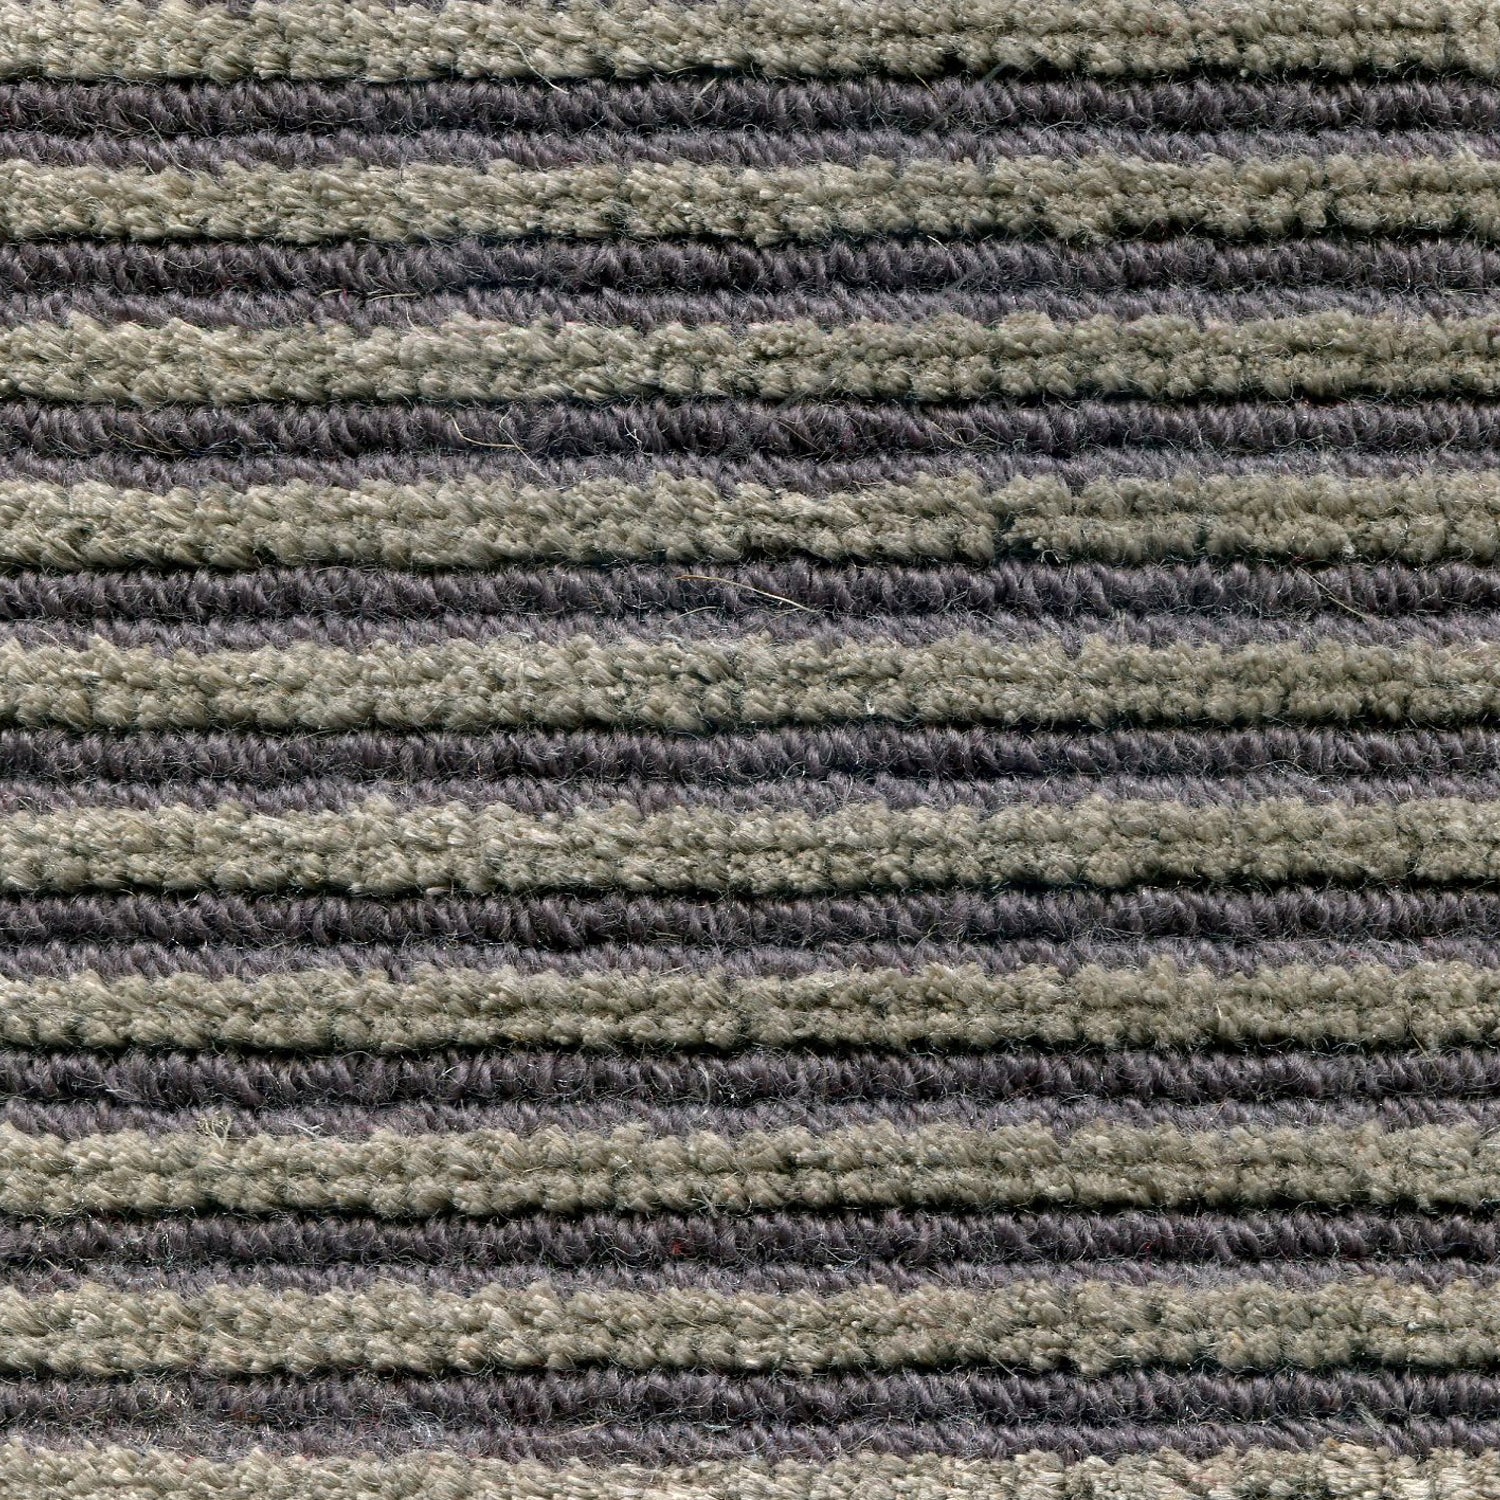 Wool-linen broadloom carpet swatch in a chunky striped weave in shades of tan and dark purple.